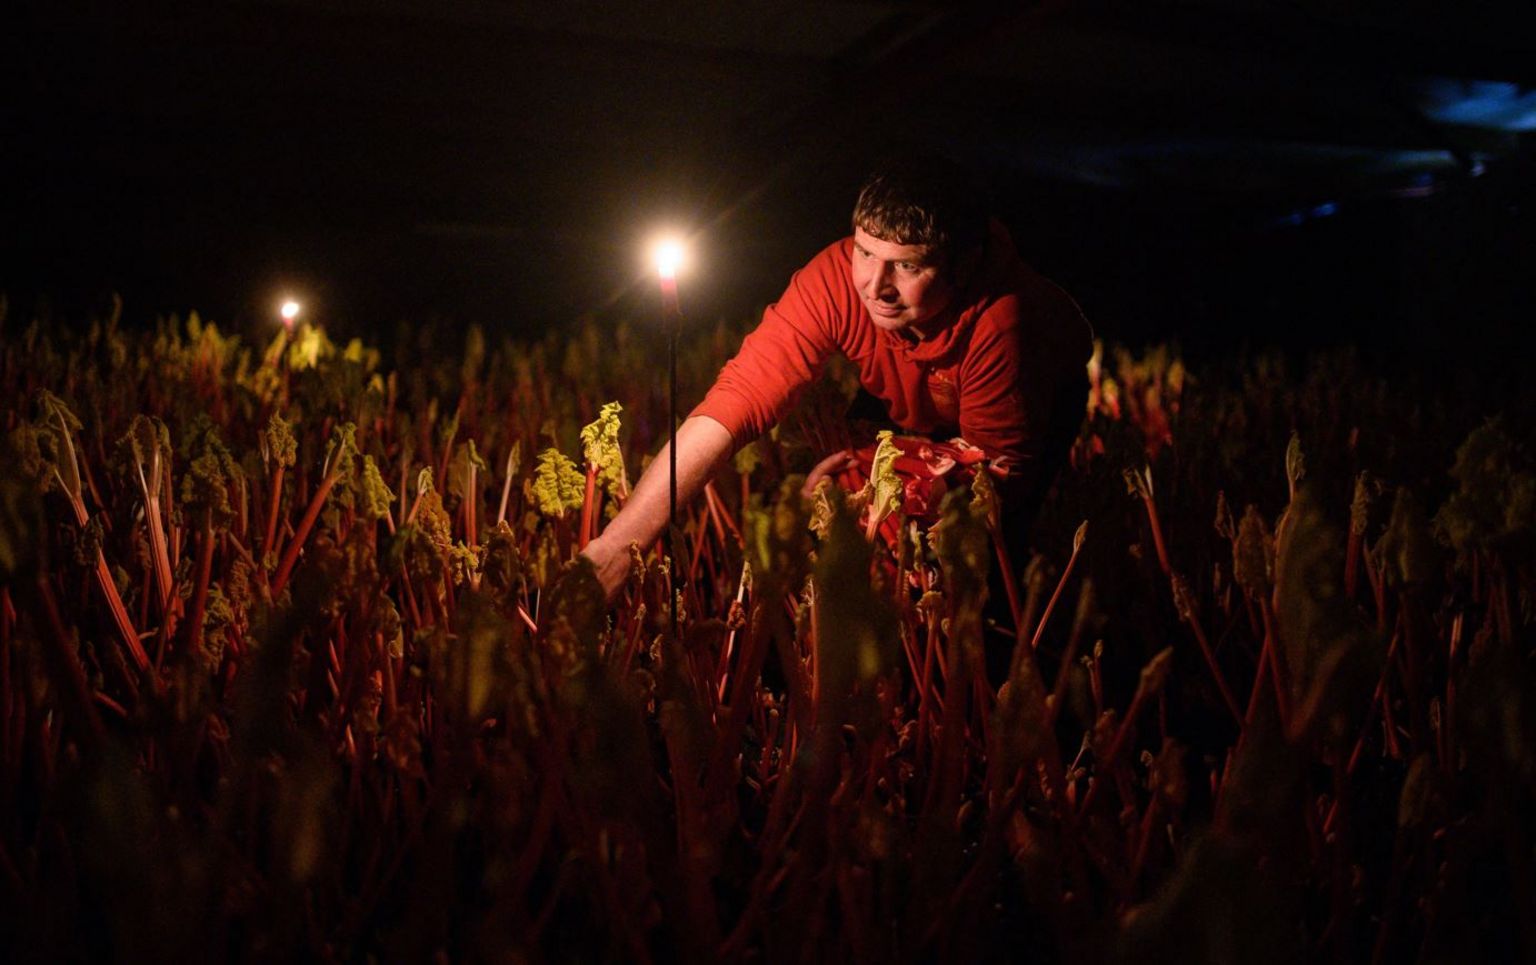 Farmer Robert Tomlinson was pictured harvesting forced rhubarb on his farm in Pudsey, West Yorkshire,